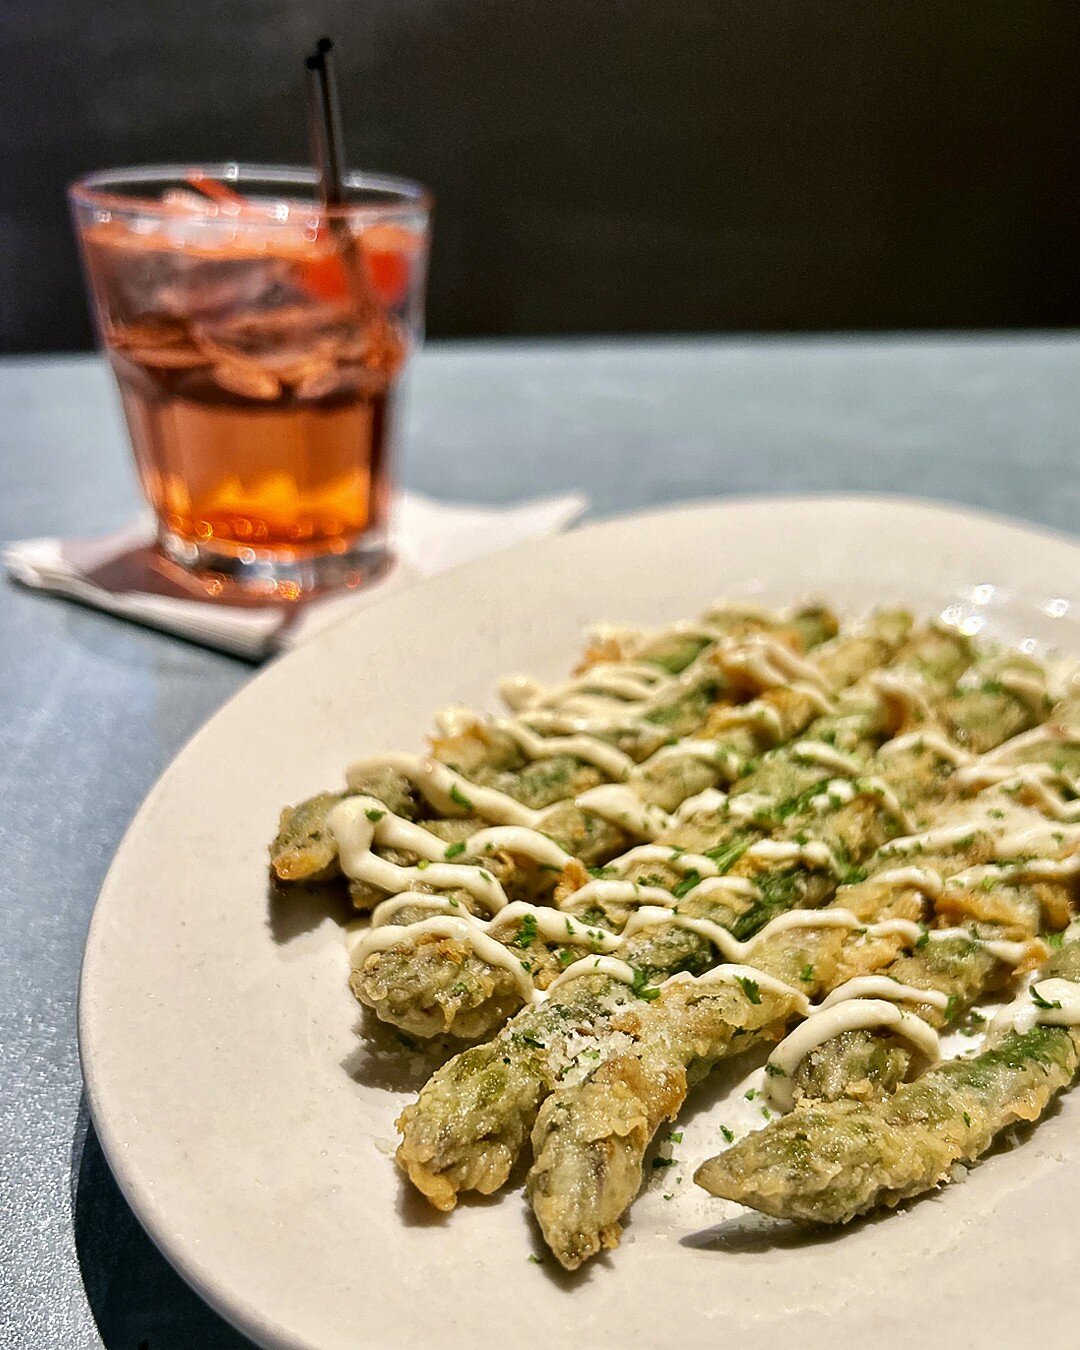 Weekend dinner plans? Look no further! We have you covered with our delicious weekend dinner specials and fresh crafted cocktails. 

Fried Asparagus with Roasted Garlic Aioli
Asparagus Spears Breaded in Seasoned Flour and fried. Topped with a Roasted